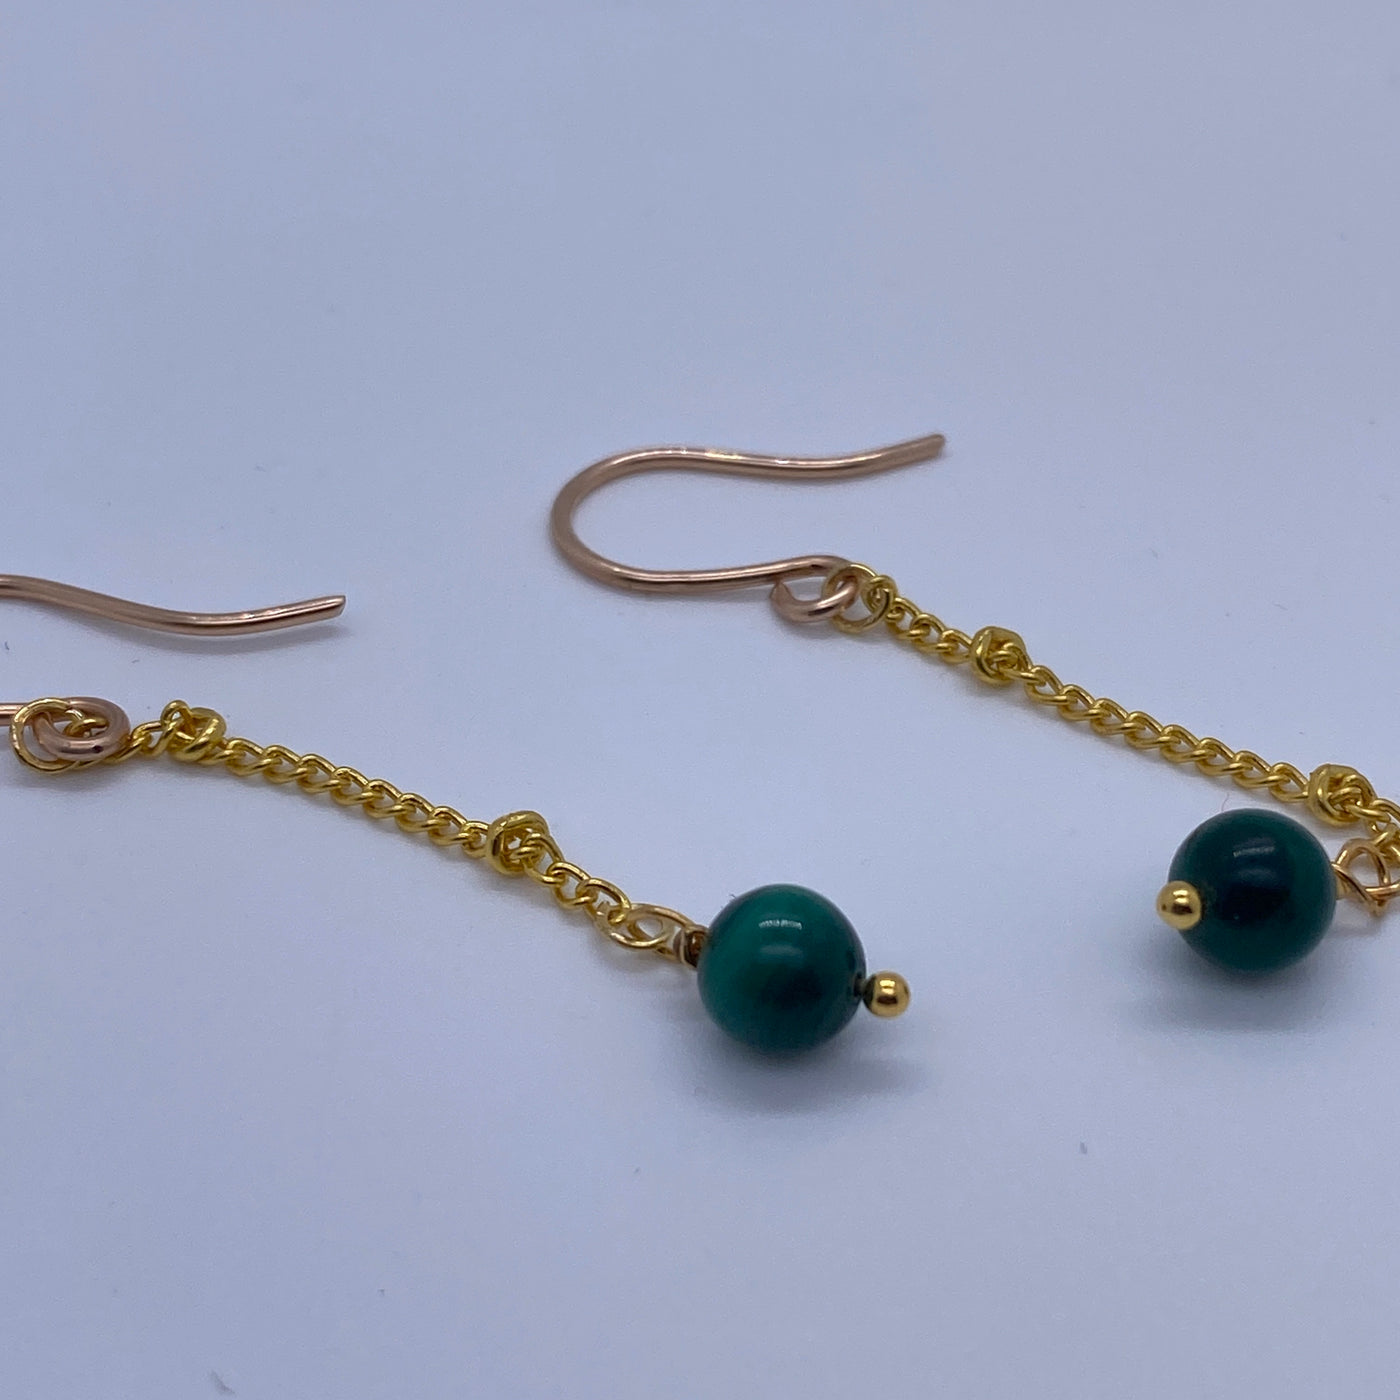 Chain earrings with malachite